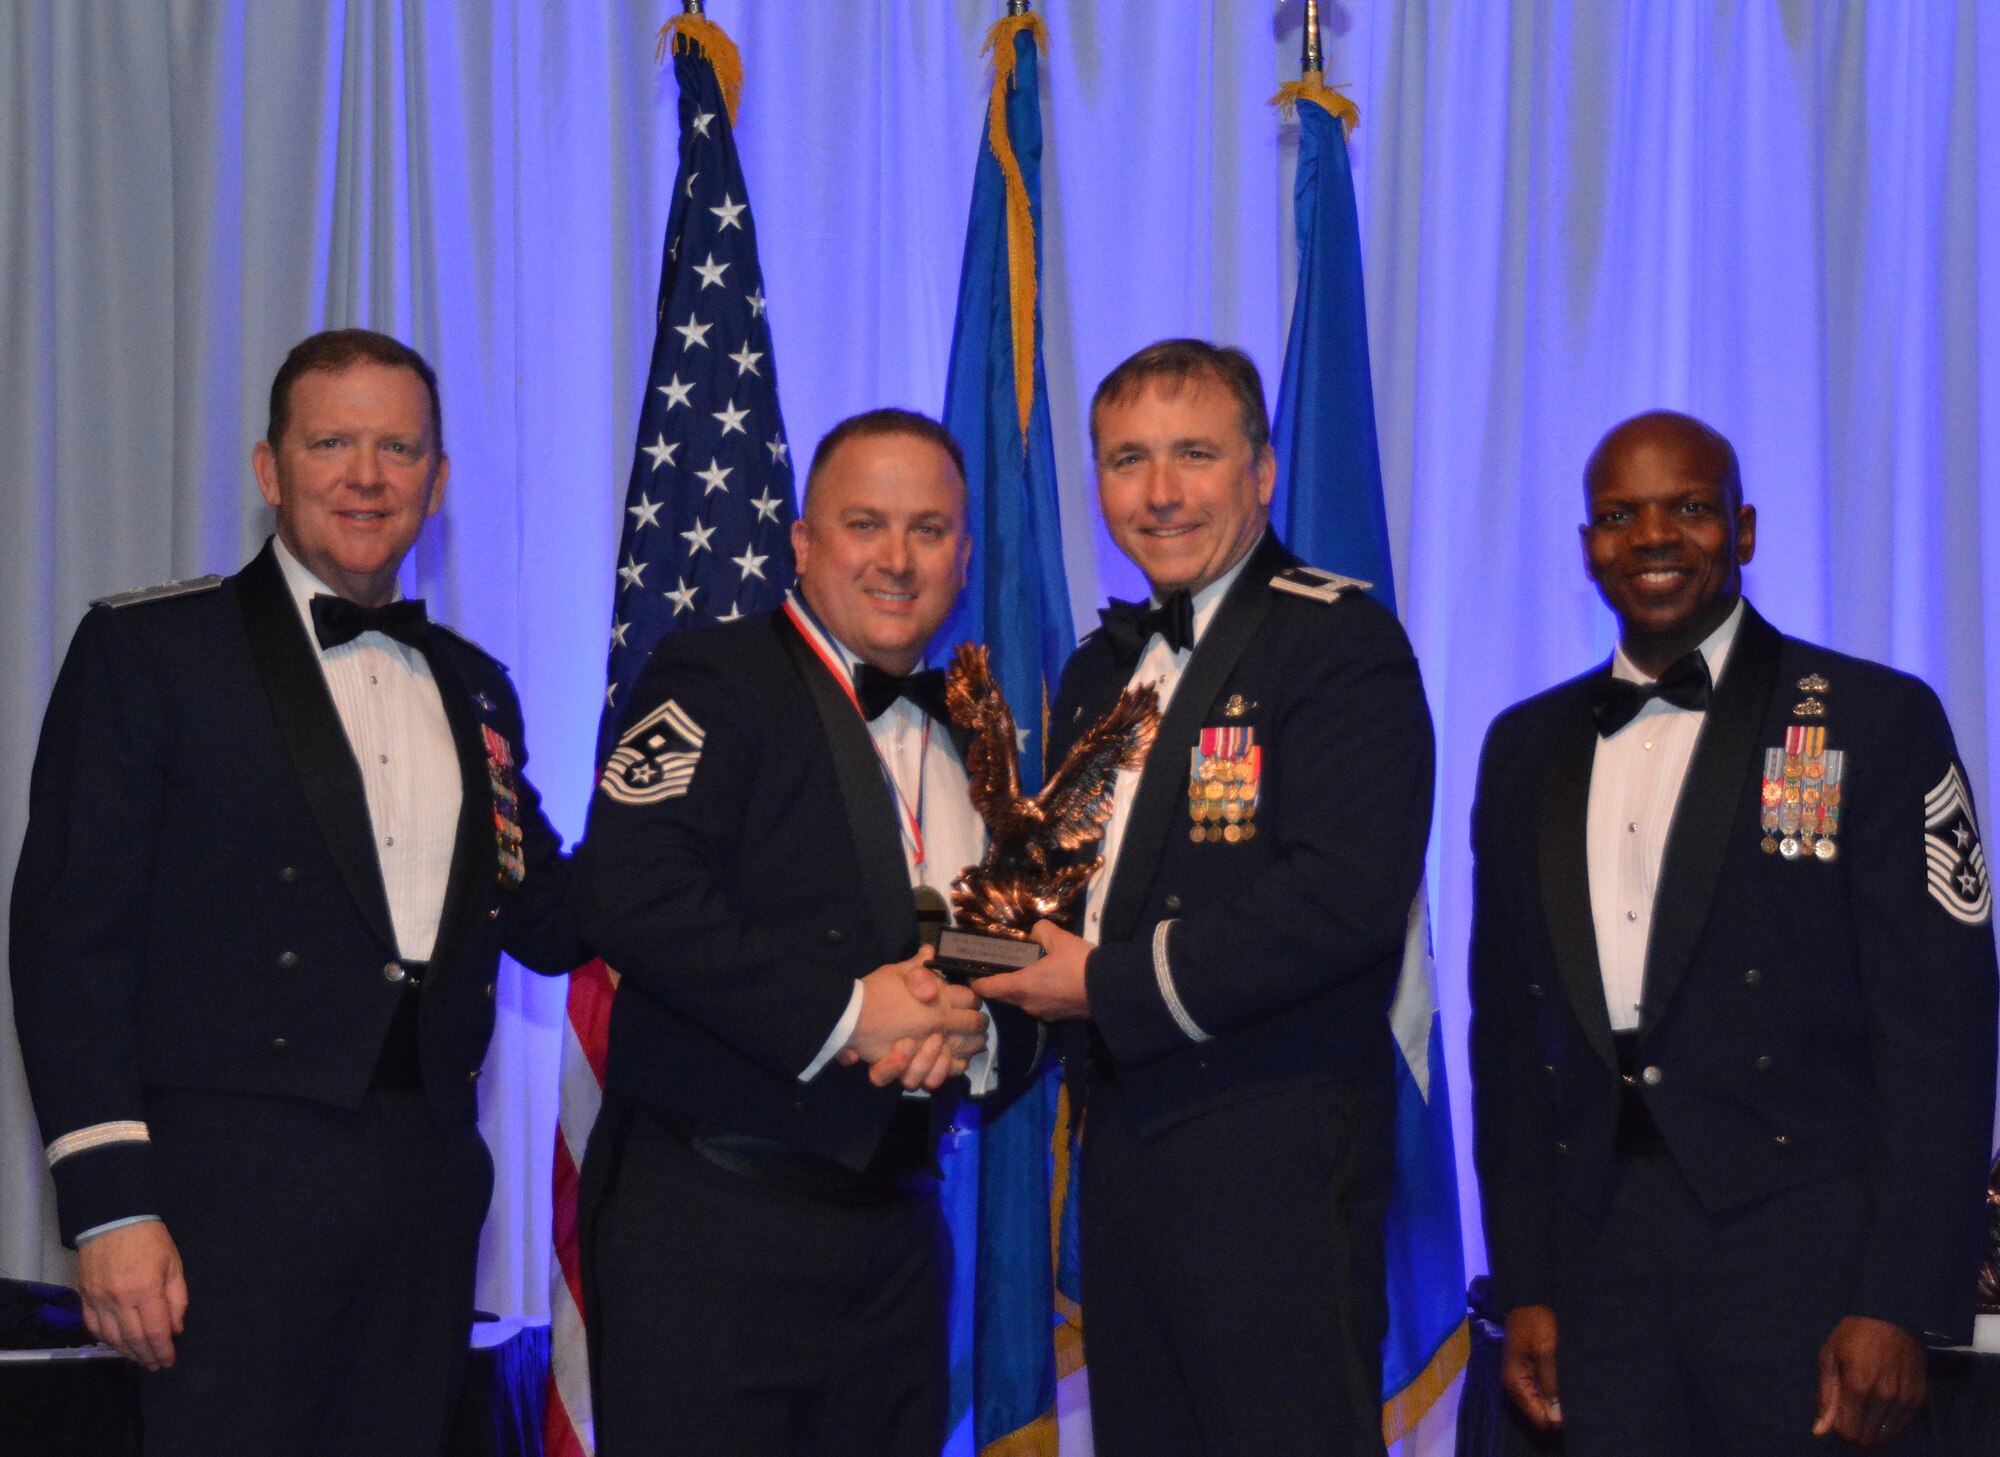 NAVAL AIR STATION FORT WORTH JOINT RESERVE BASE, Texas – Senior Master Sgt. Steven Purvis, 301st Aircraft Maintenance Squadron first sergeant, accepts the 2015 First Sergeant of the Year award from Col. John Breazeale, 301st Fighter Wing commander, Feb. 20 at the Fort Worth Stockyards, Texas. Purvis was publicly recognized for outstanding service during the Annual Awards Banquet hosted by the 301st Fighter Wing. (U.S. Air Force photo by Staff Sgt. Samantha Mathison)